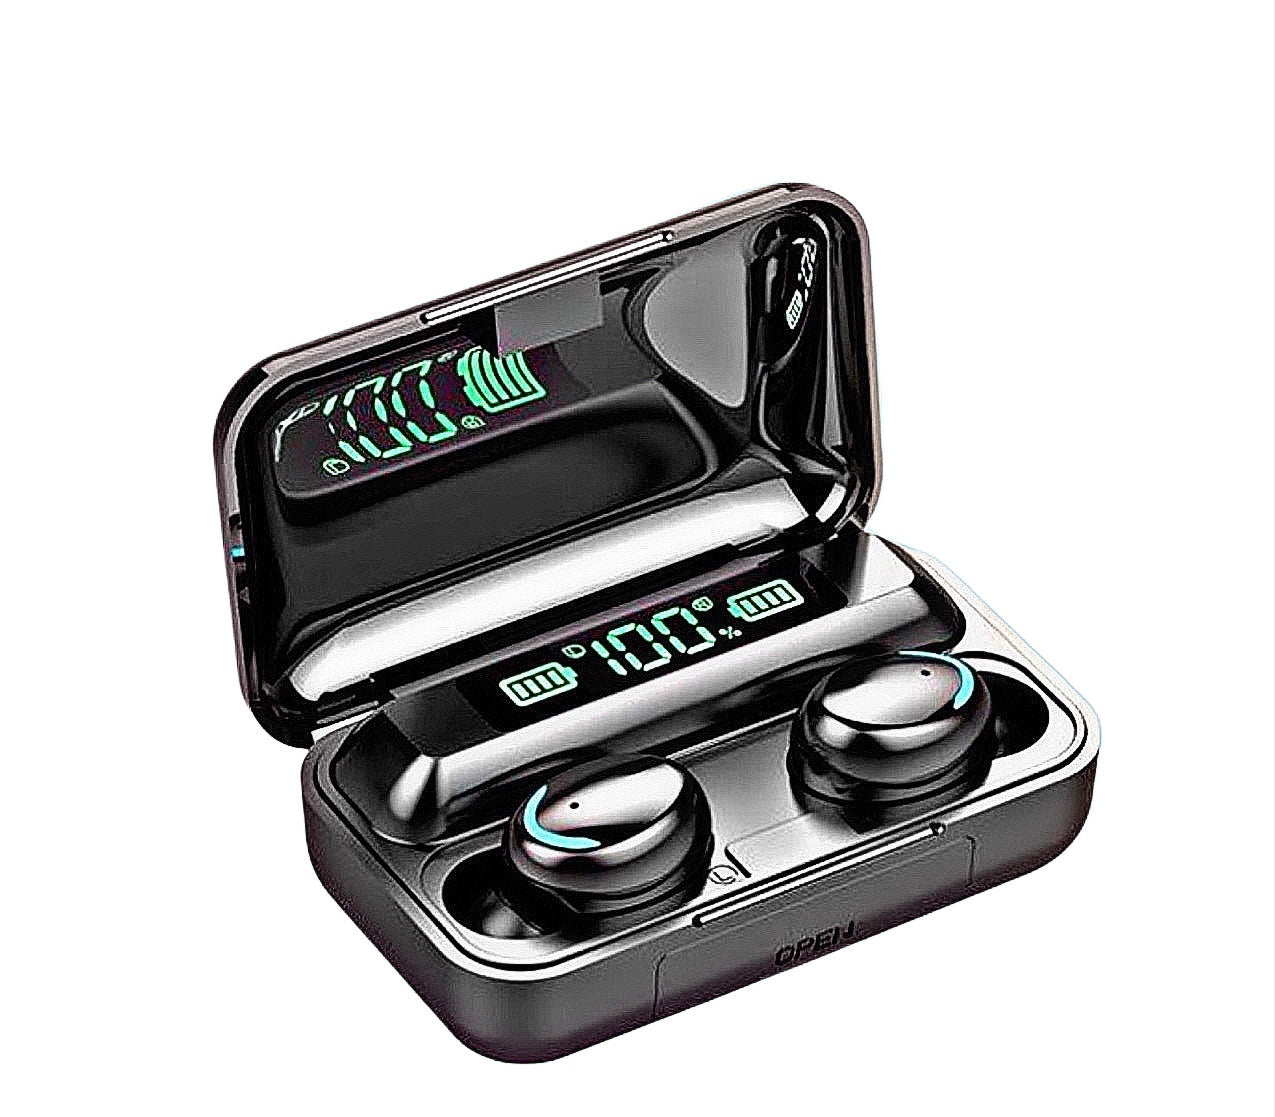 Adult Men's Calming Kit With New Fitness Tracker